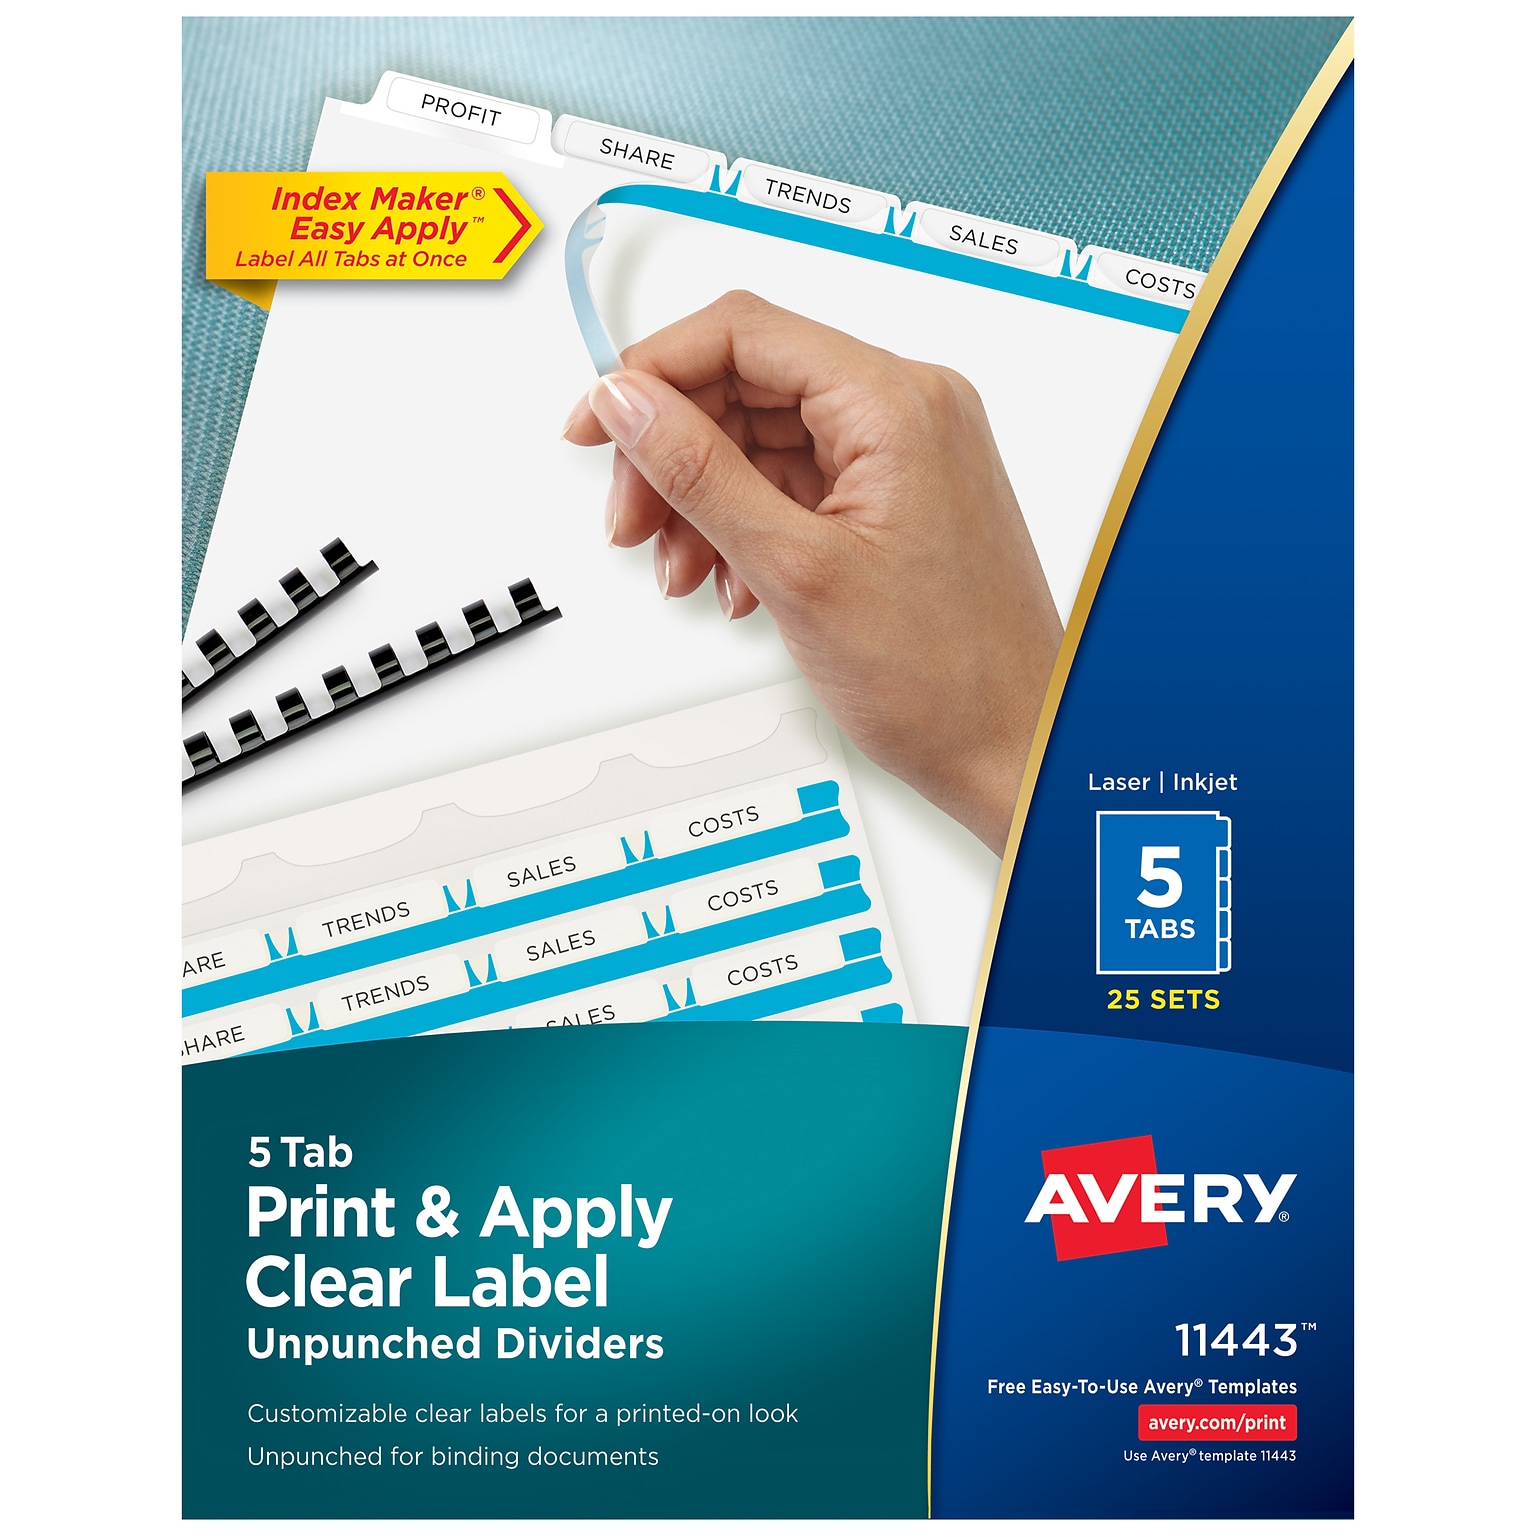 Avery Index Maker Unpunched Paper Dividers with Print & Apply Label Sheets, 5 Tabs, White, 25 Sets/Pack (11443)